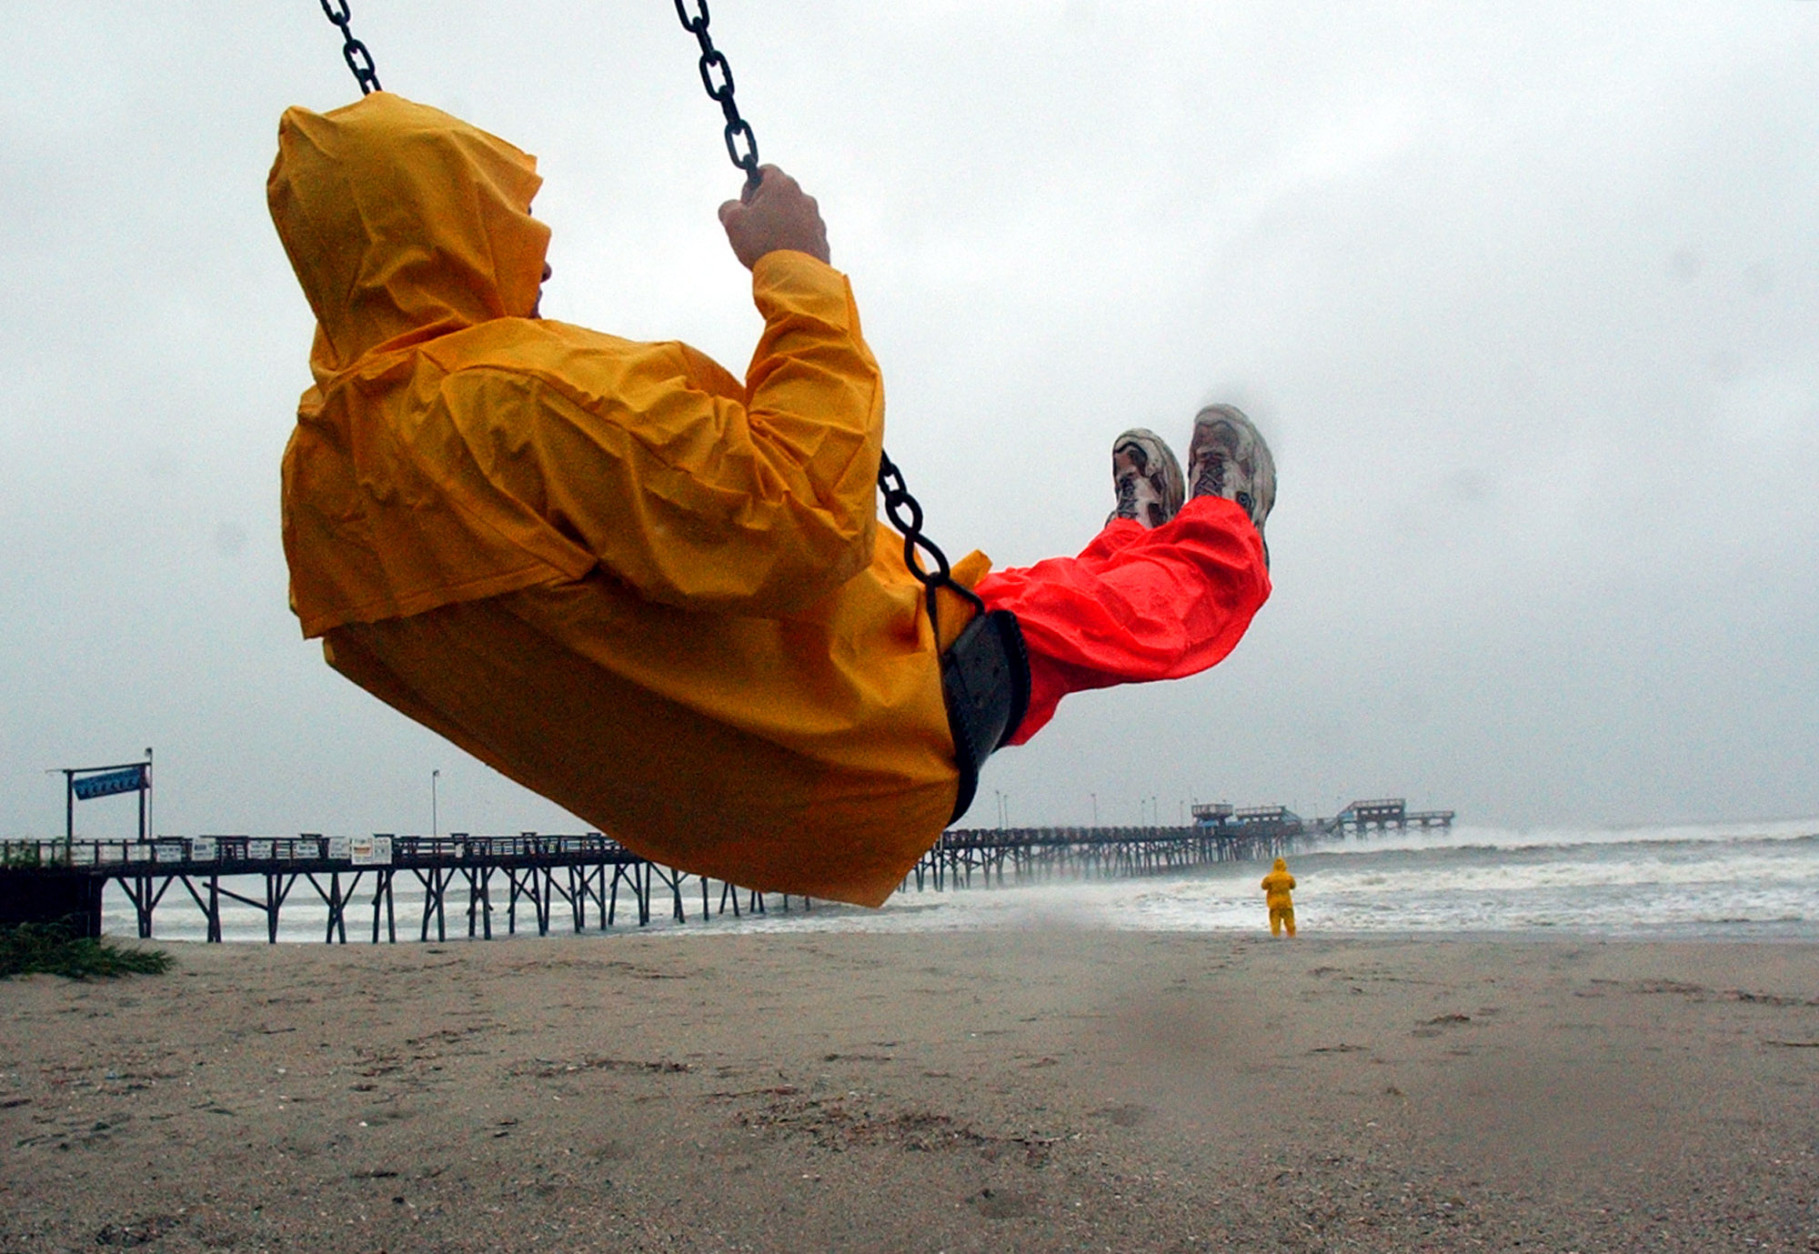 Jack Pierce, 38, of High Point, NC., takes a moment to swing on a playground set next to the Triple S Pier in Atlantic Beach, N.C., on Thursday, Sept. 18, 2003. At rear his brother Scott, 32, walks along the beach and watches the waves crash against the pier as Hurricane Isabel approaches landfall. (AP Photo/Dave Martin)